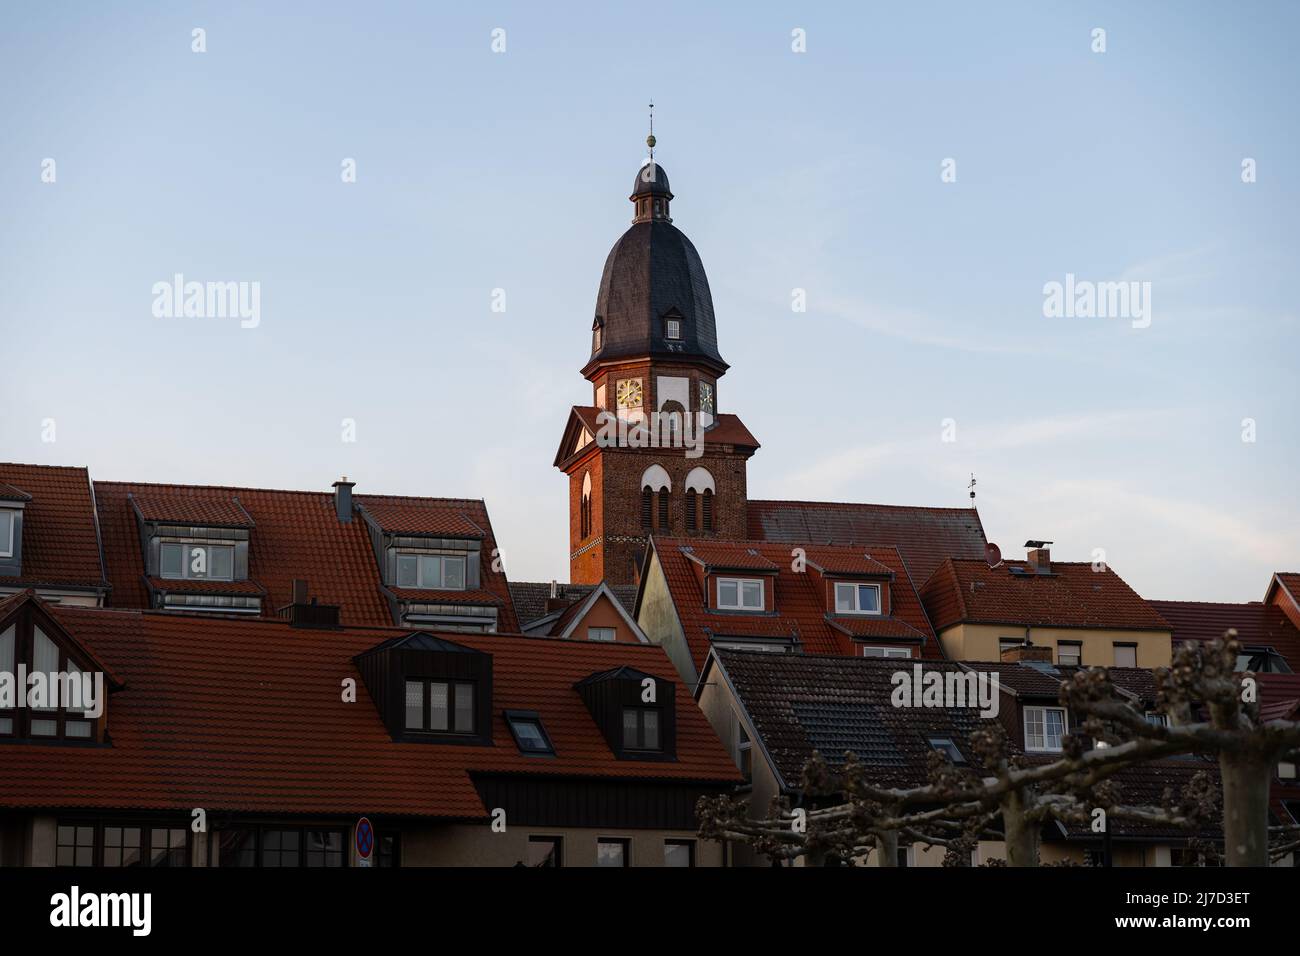 Big church in the skyline of Waren (Müritz) in Germany. Old buildings in the city with red tiled roofs. Traditional architecture in the evening. Stock Photo